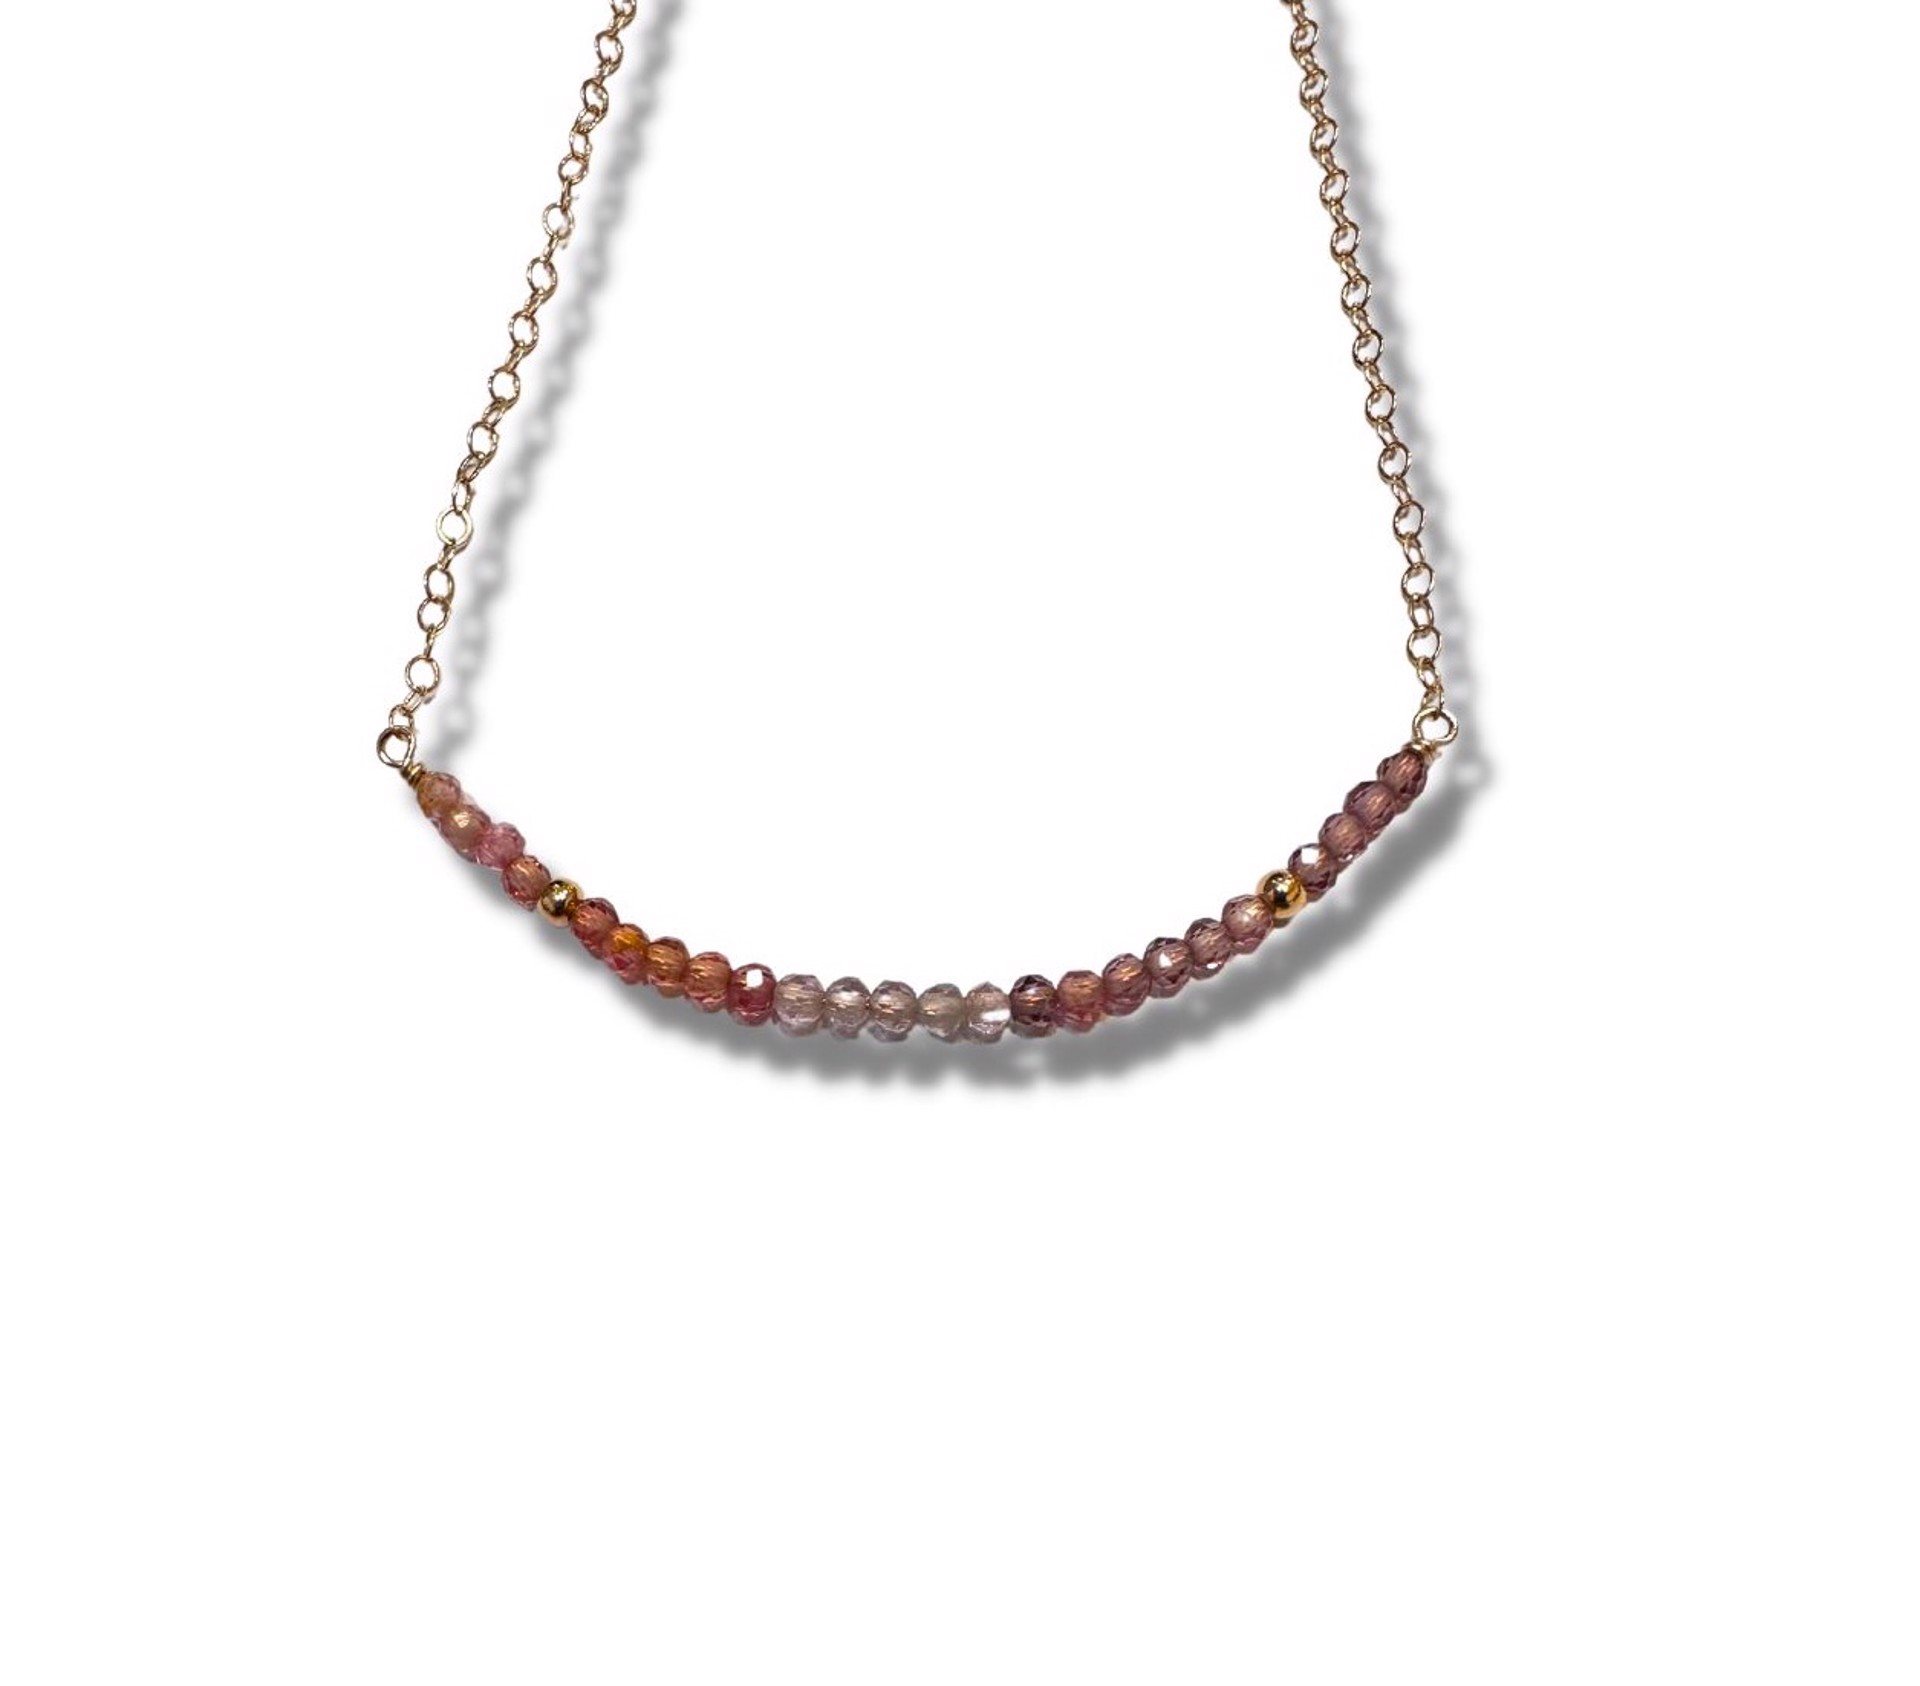 Necklace - Spinel with 14K Gold Filling by Julia Balestracci